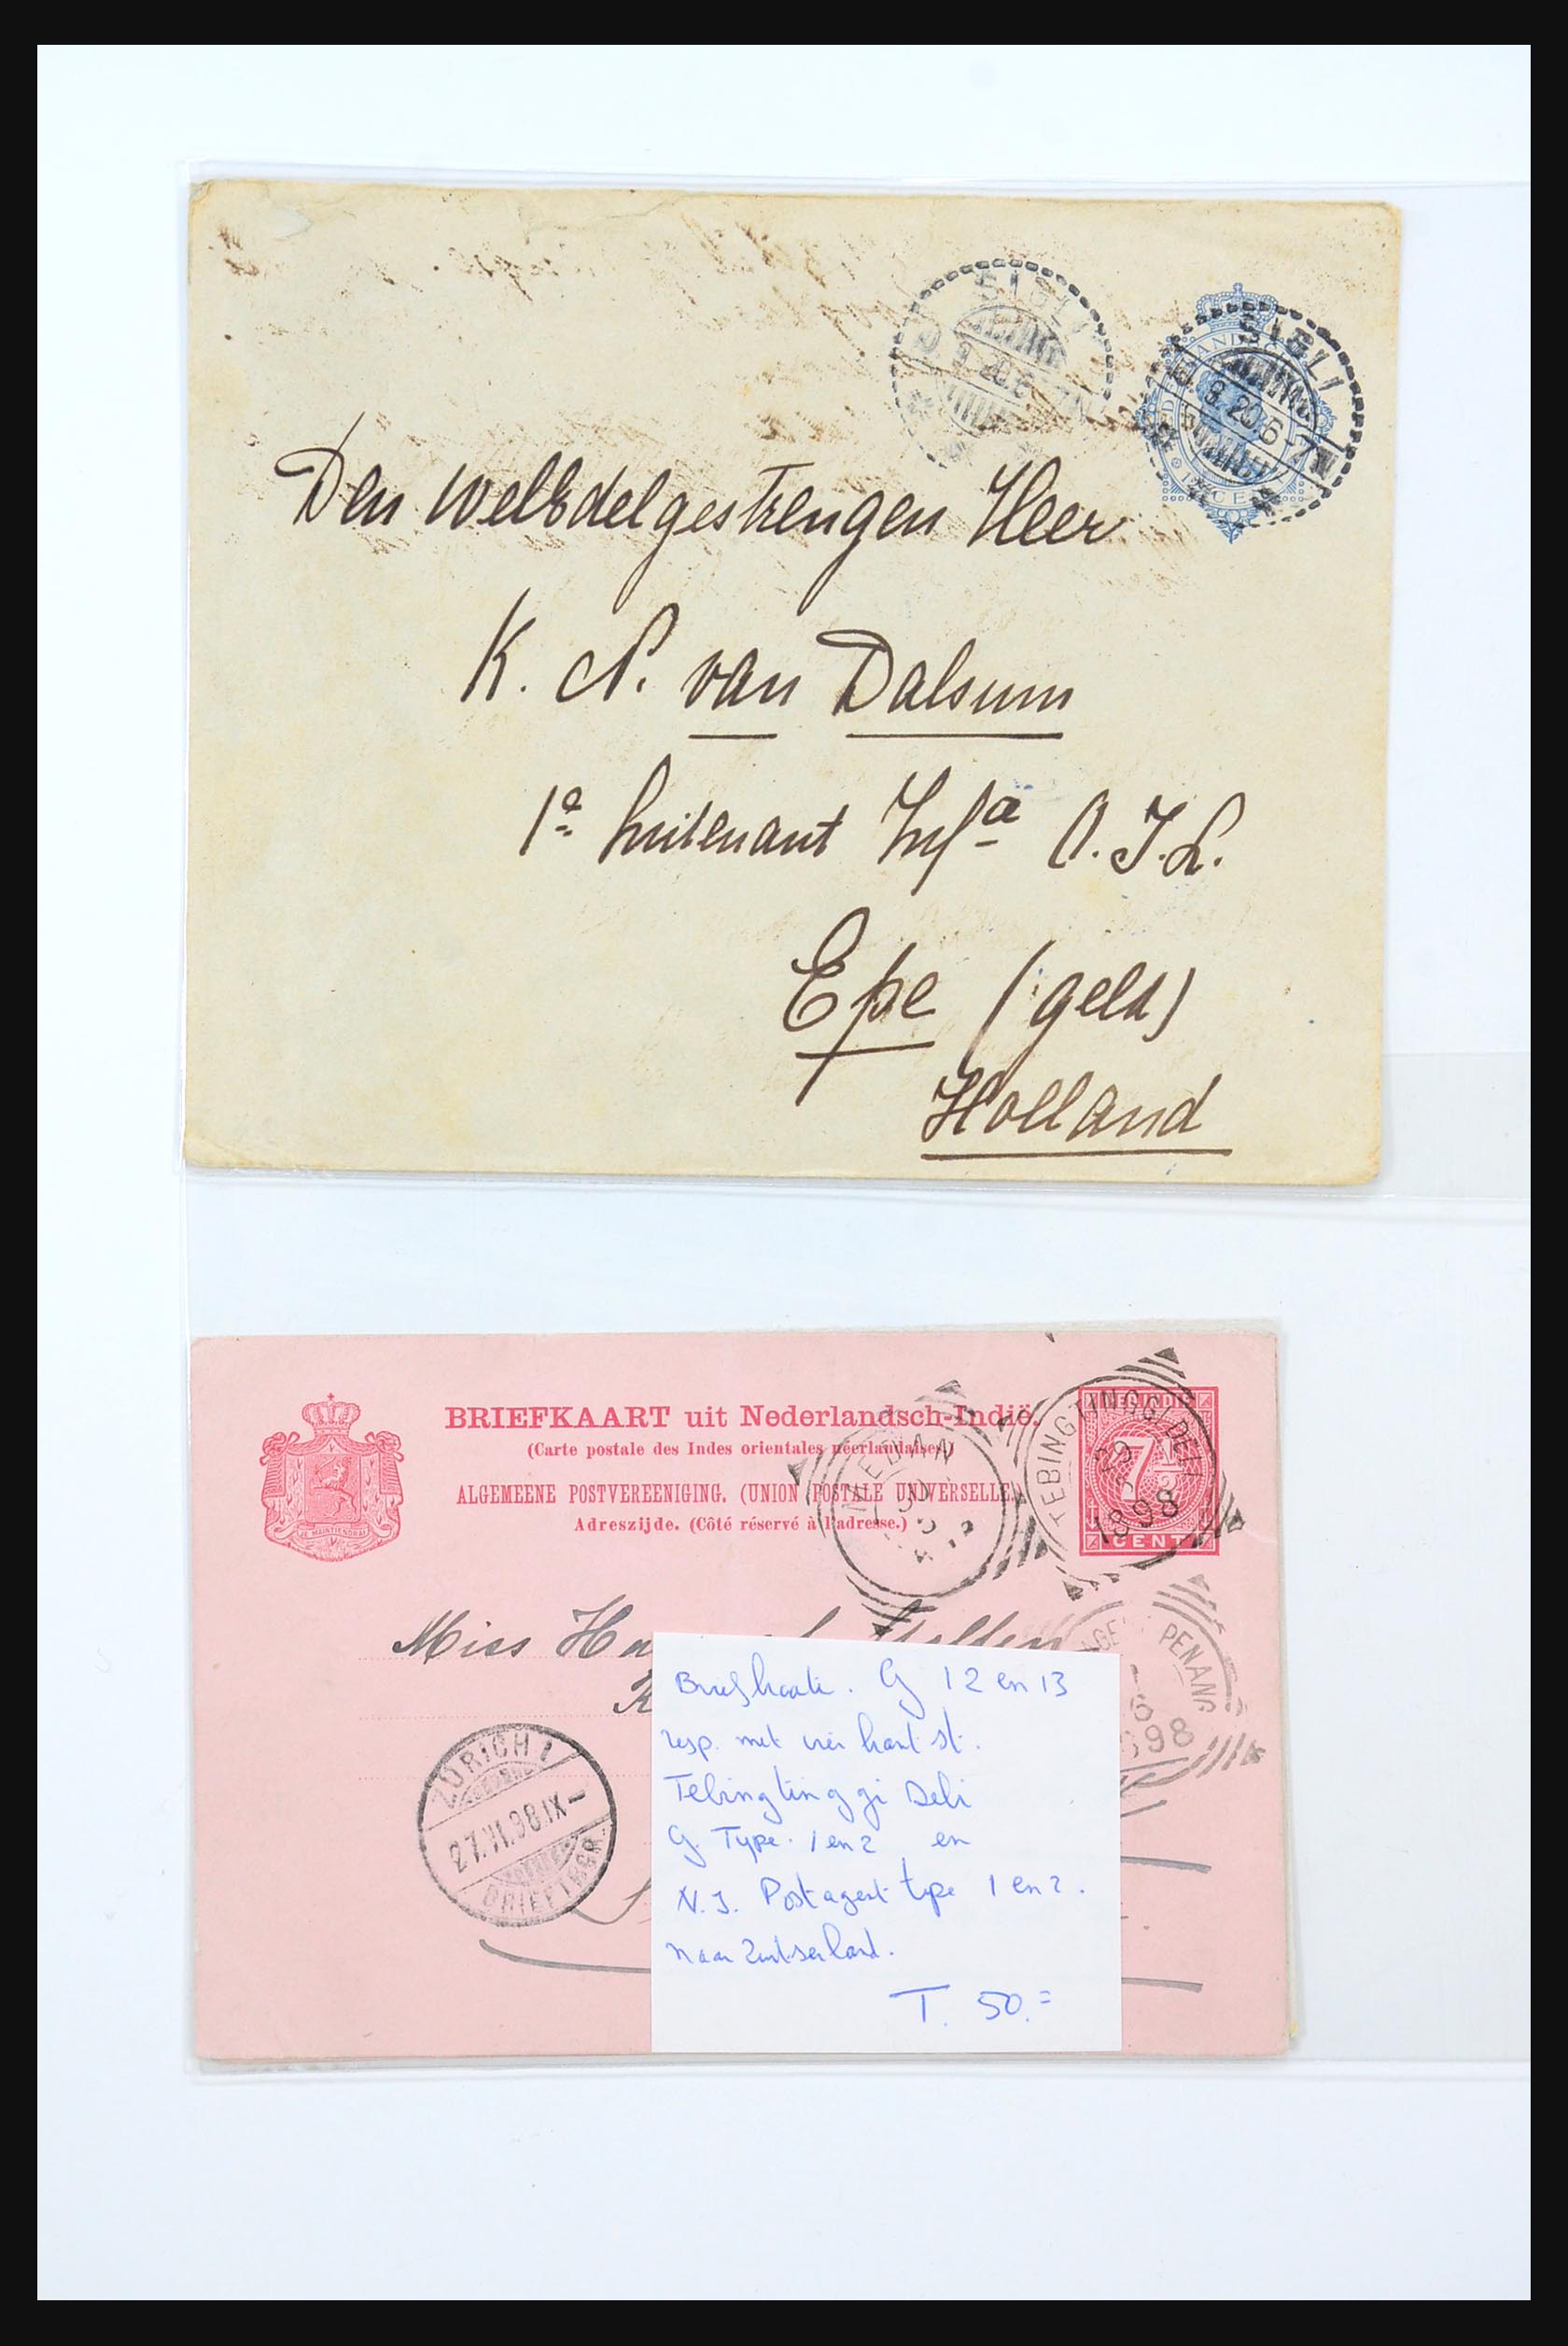 31361 793 - 31361 Netherlands Indies covers 1880-1950.